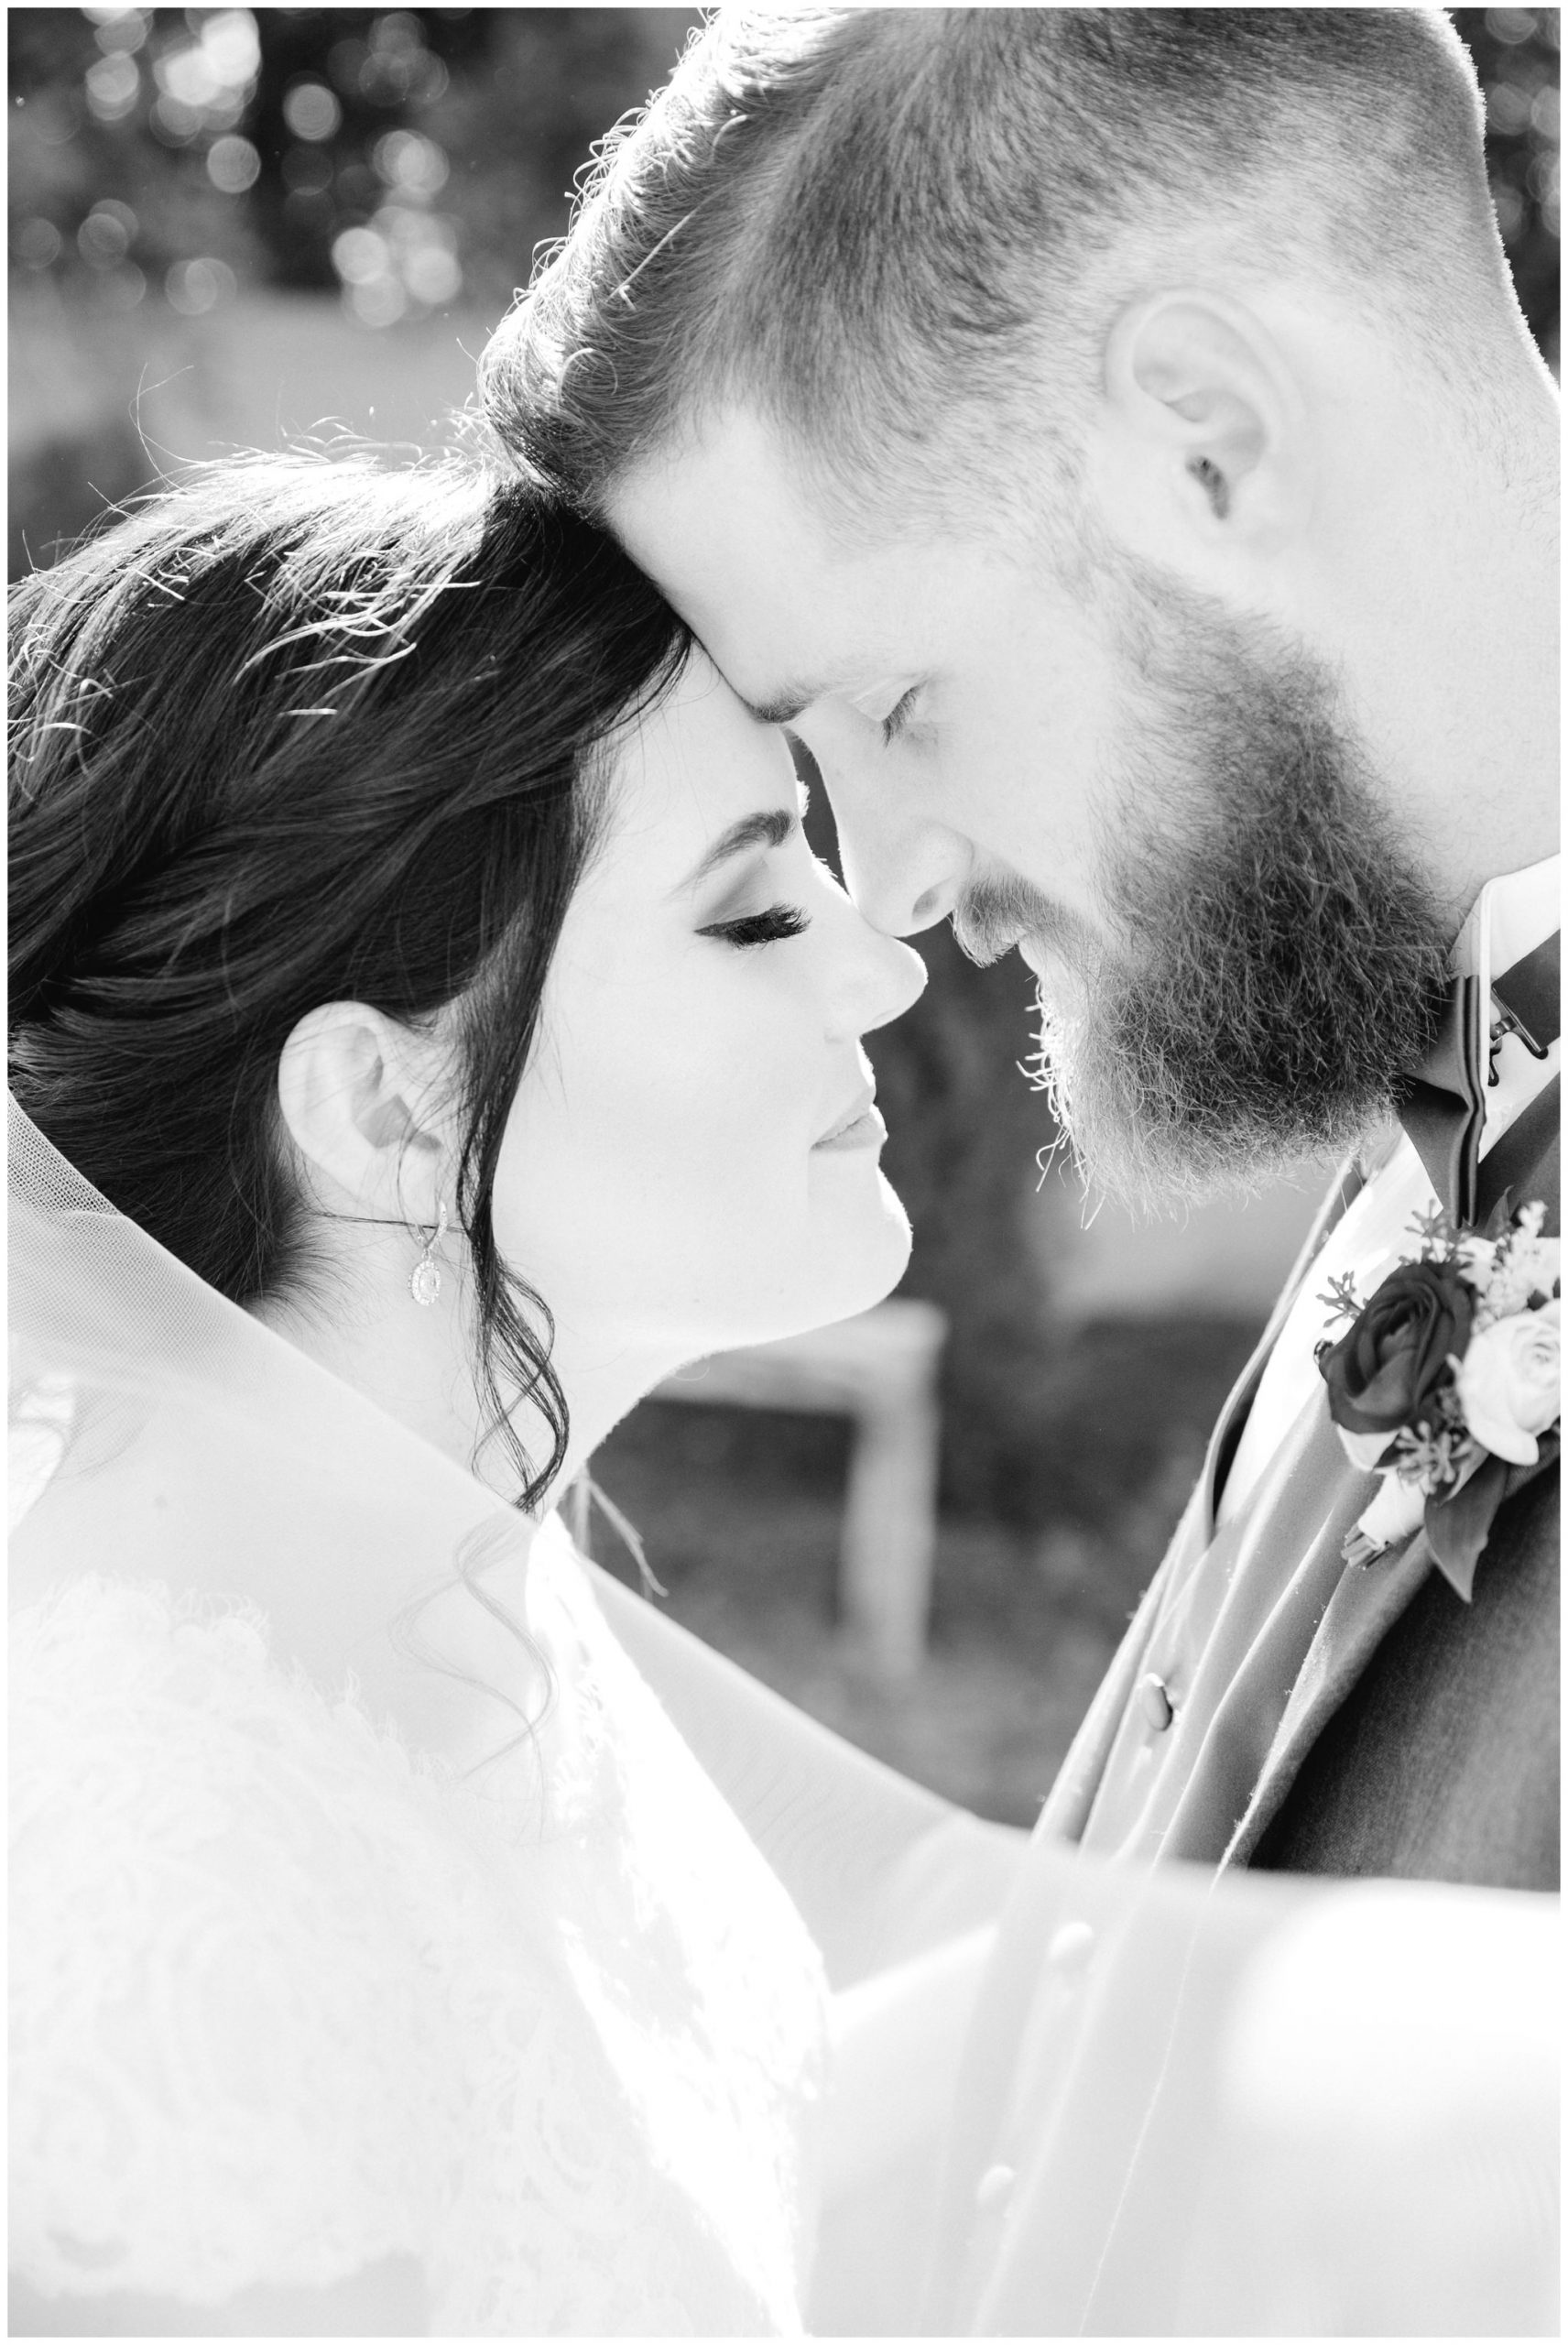 Black and white image of bride and groom snuggling close together at their wedding about to kiss.